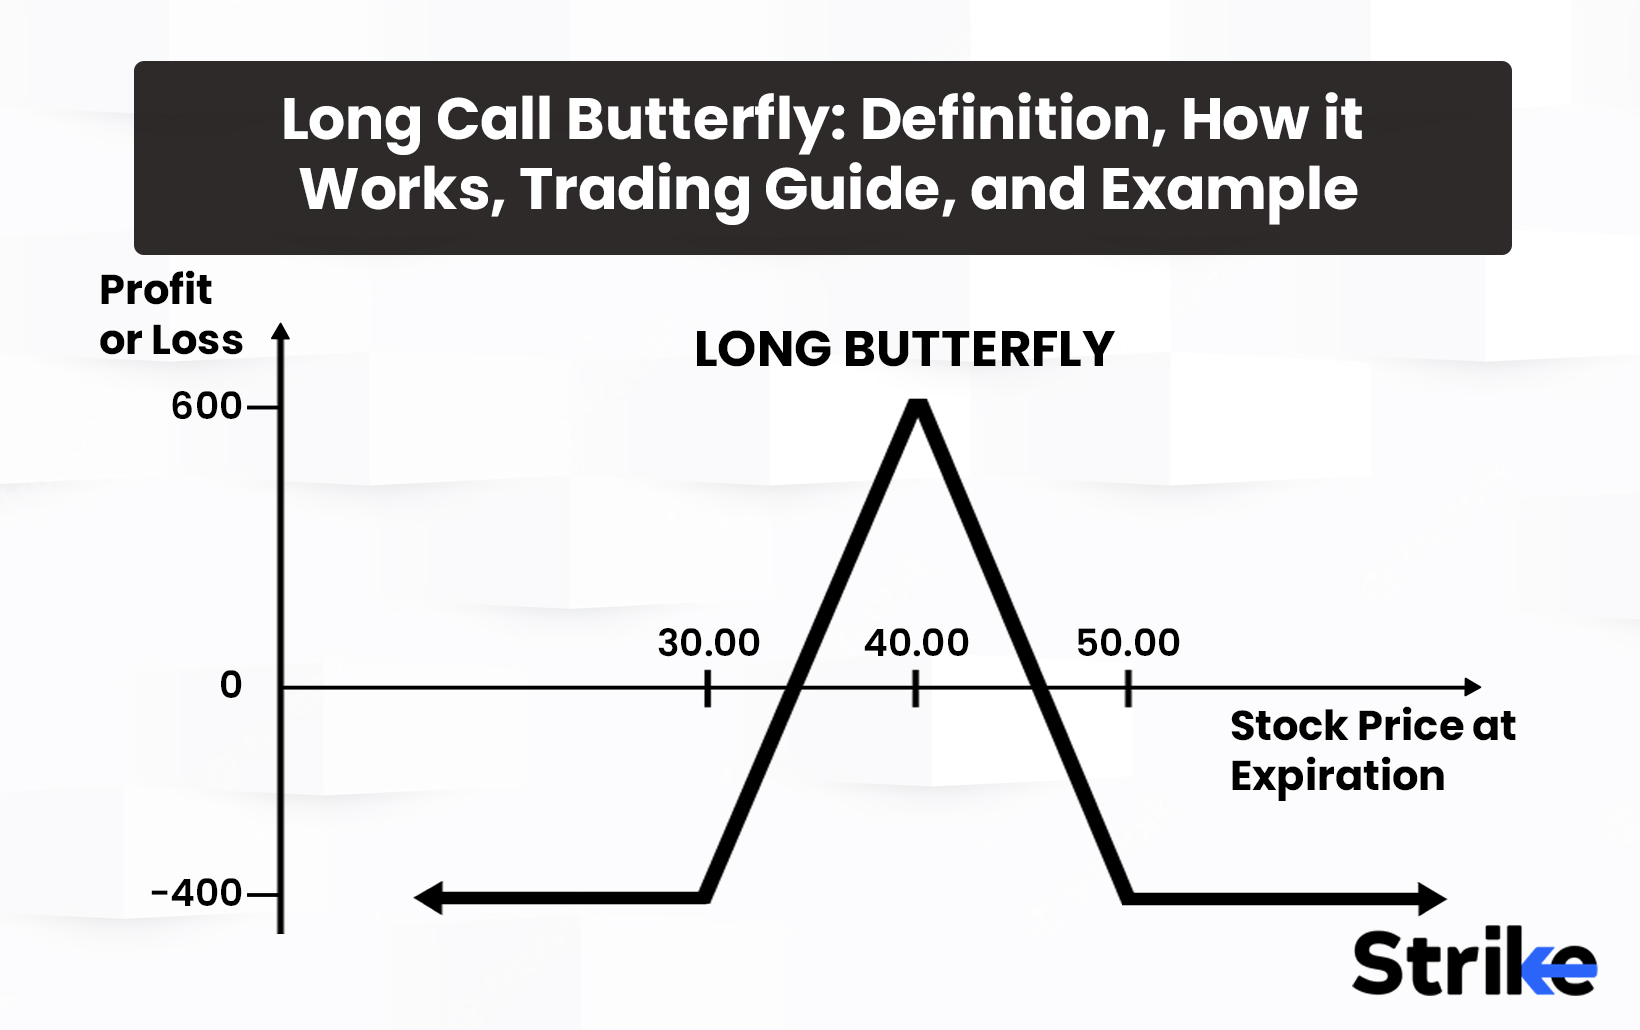 Long Call Butterfly: Definition, How it Works, Trading Guide, and Example